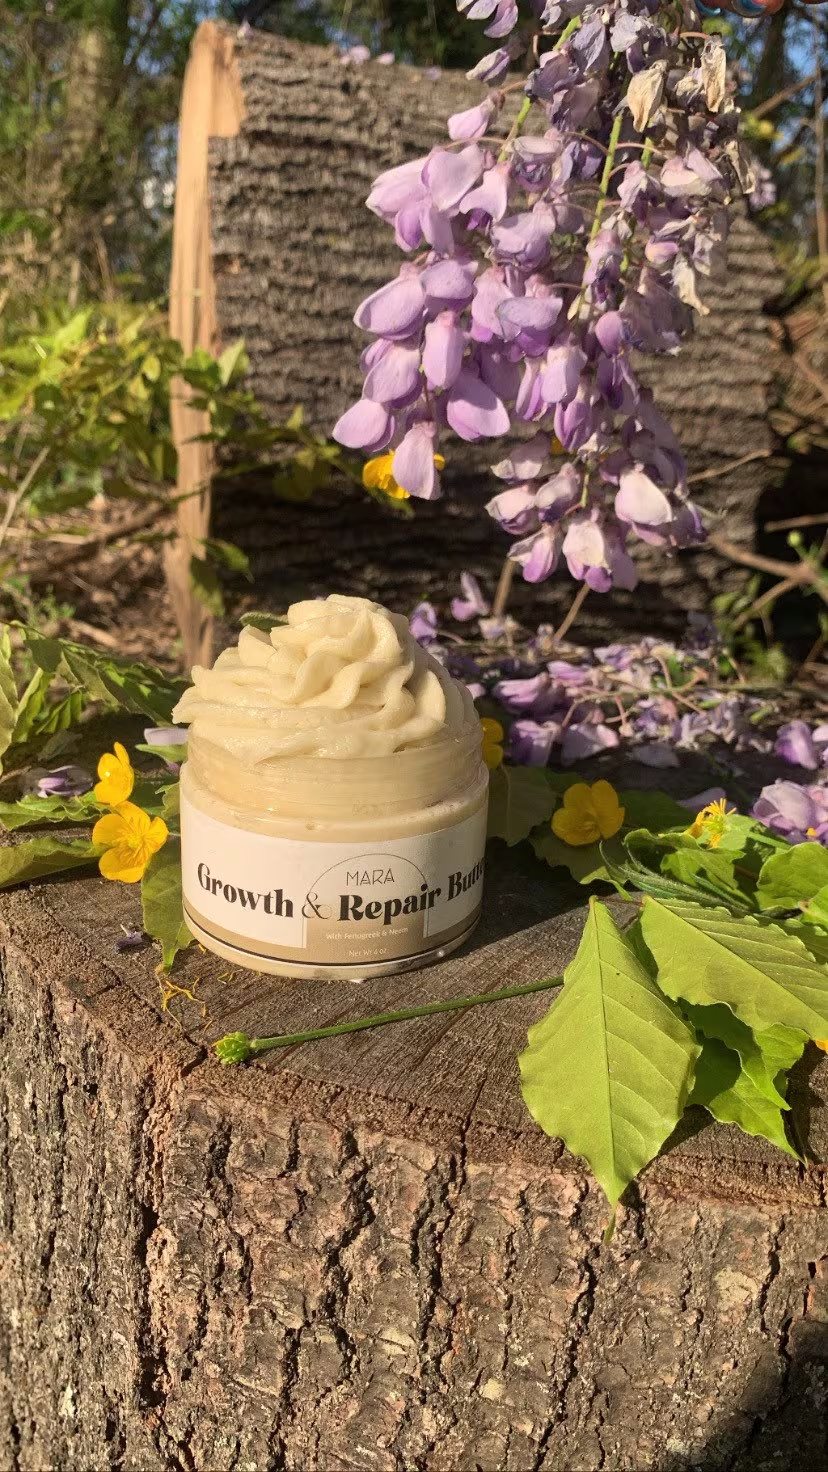 Growth and Repair Hair Butter